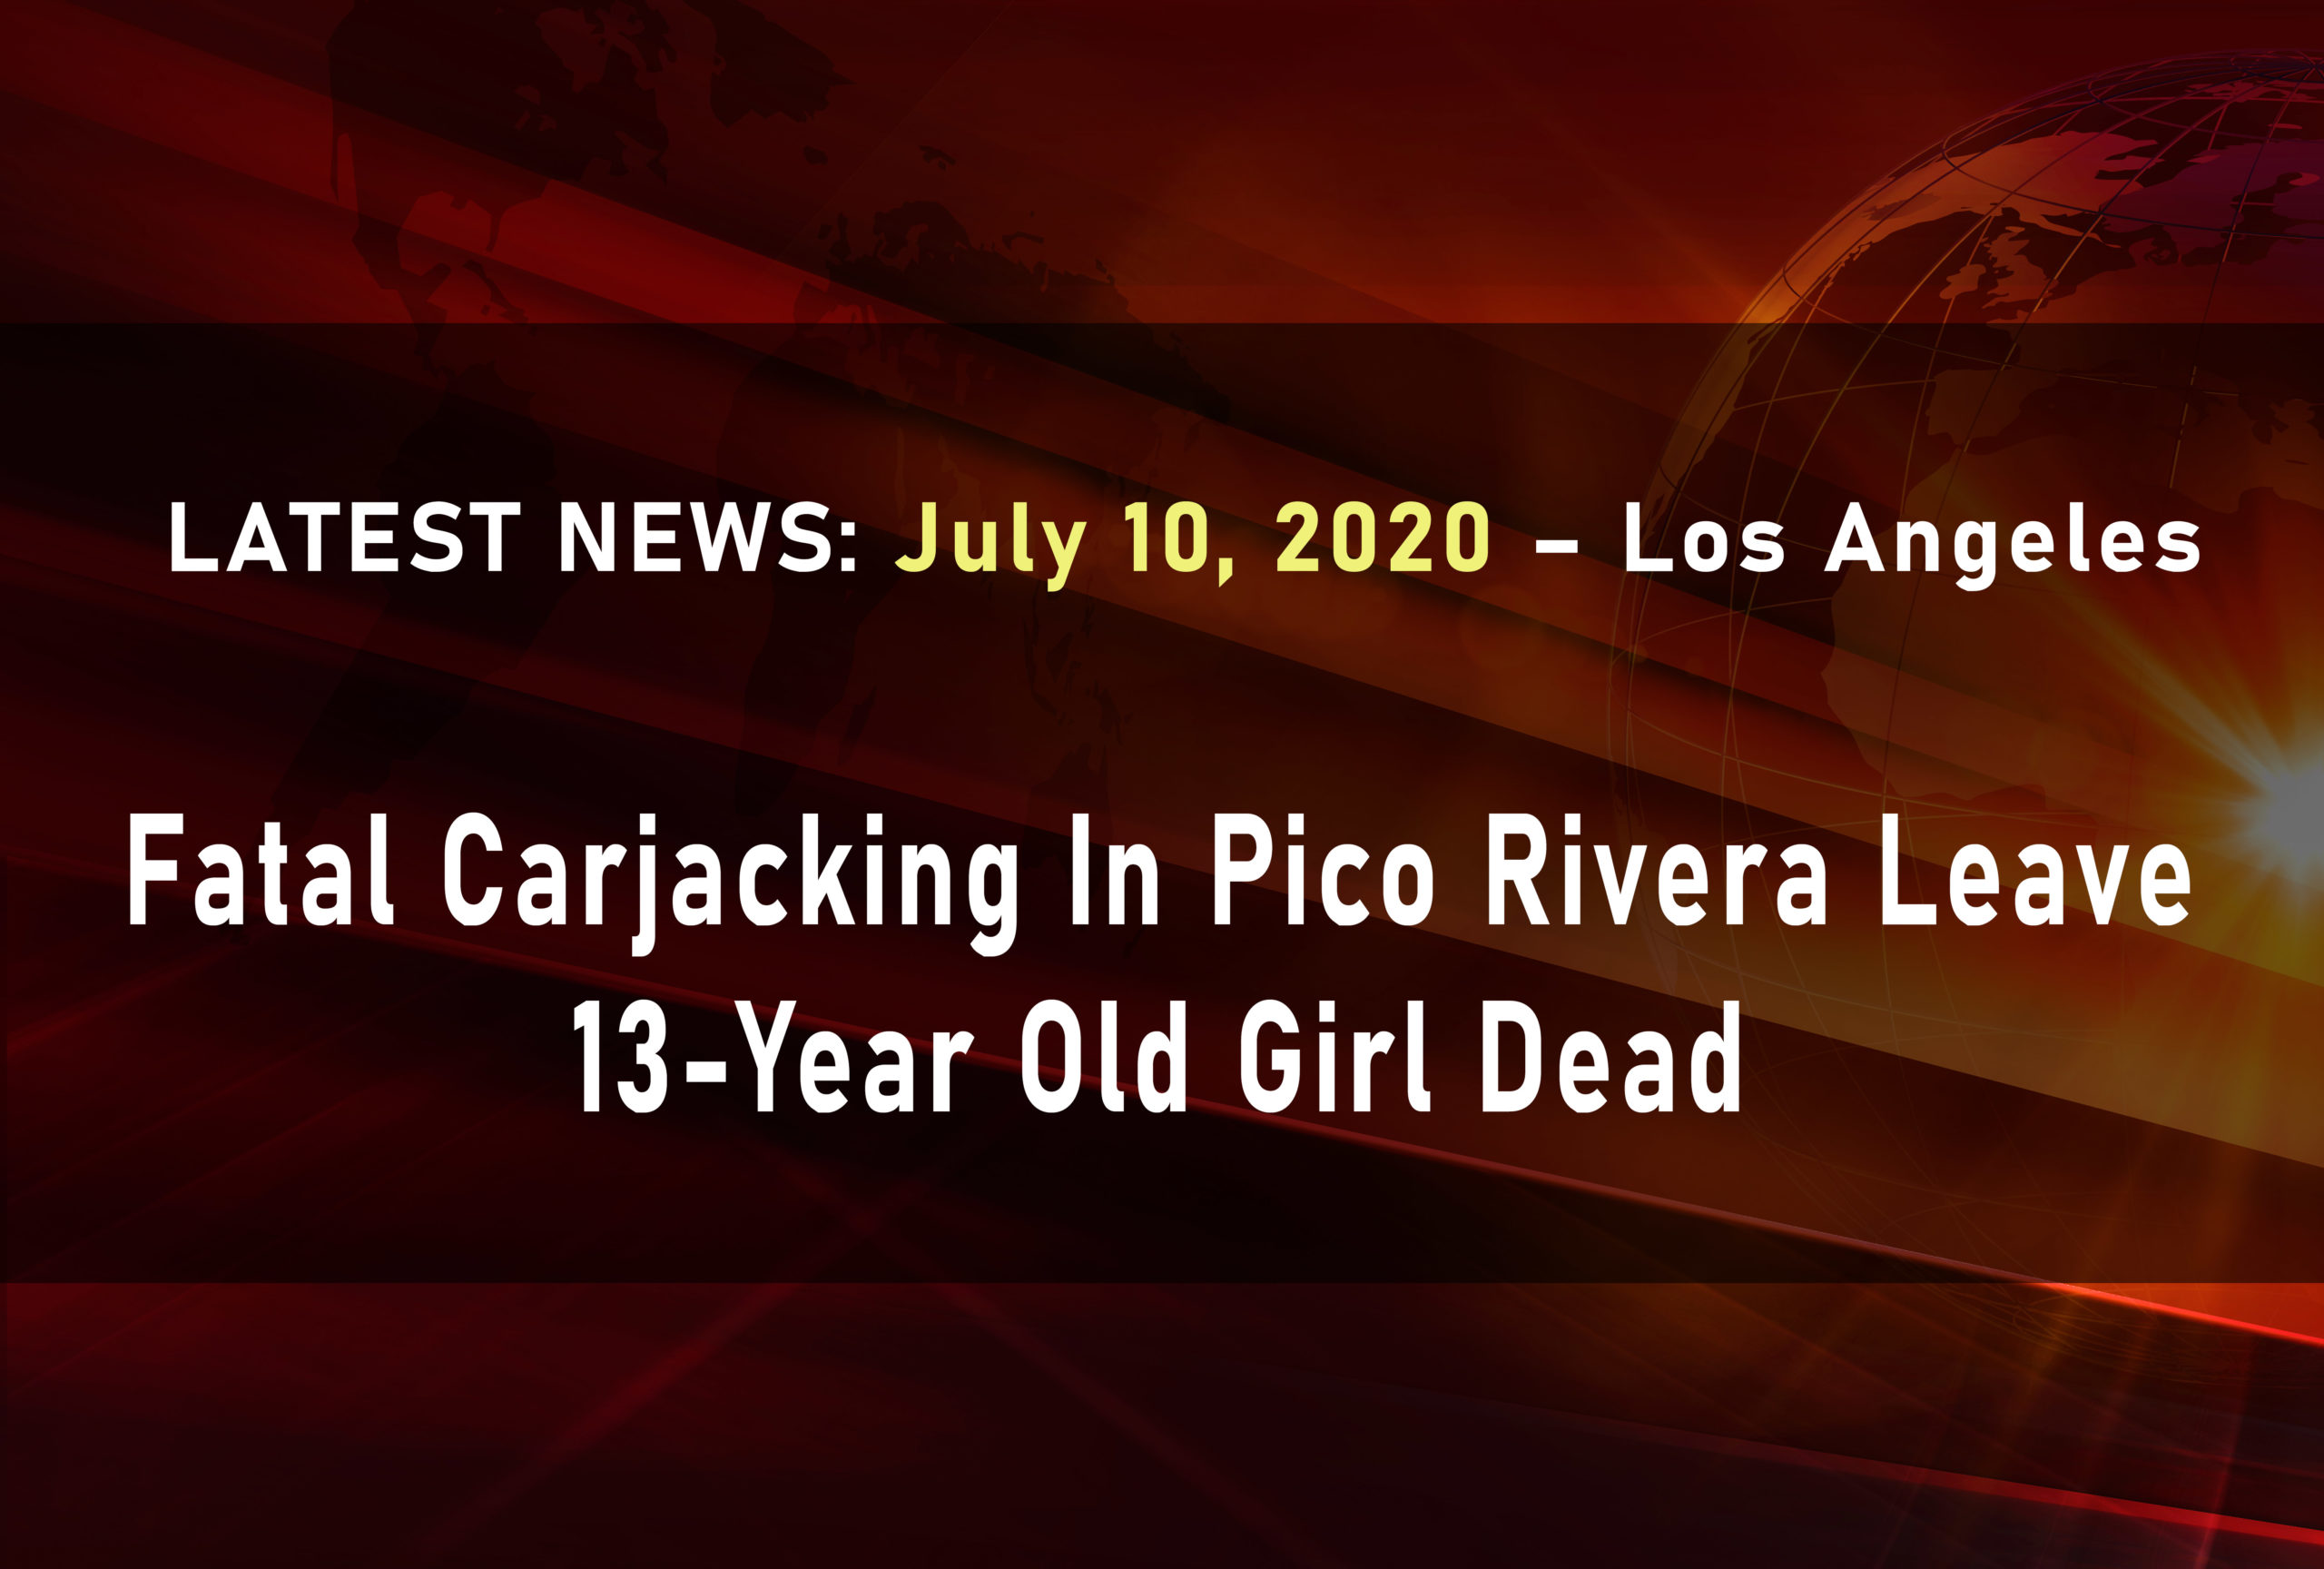 Fatal Carjacking In Pico Rivera Leave 13-Year Old Girl Dead